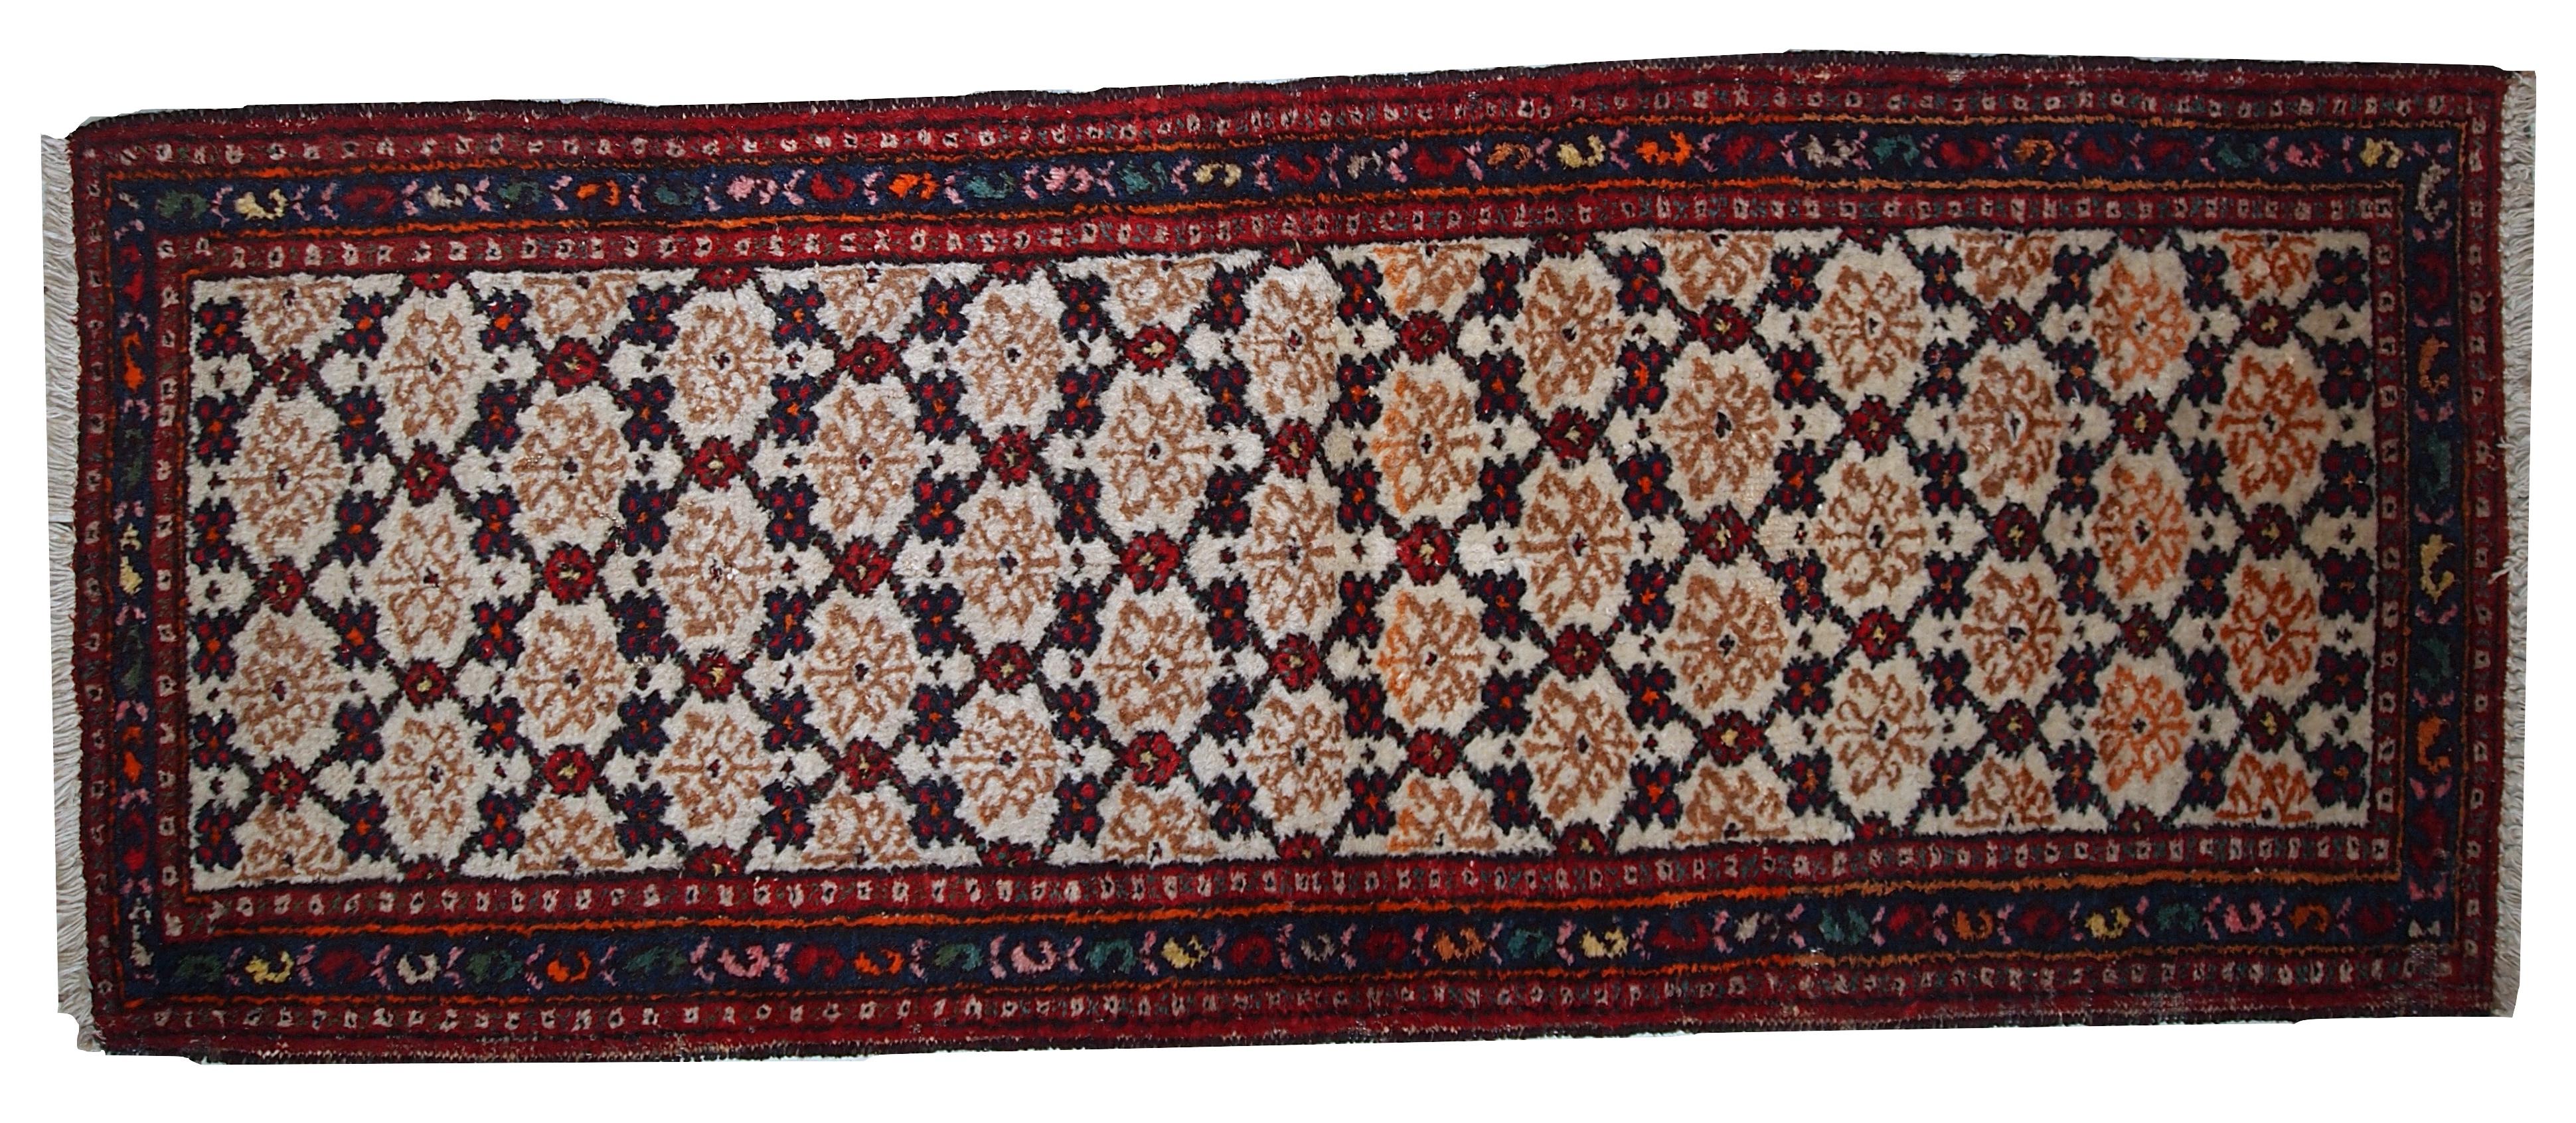 Antique Hamadan runner in good original condition. The rug is in white, red and blue shades. Measures: 2.6' x 6.8' (80 cm x 207 cm).